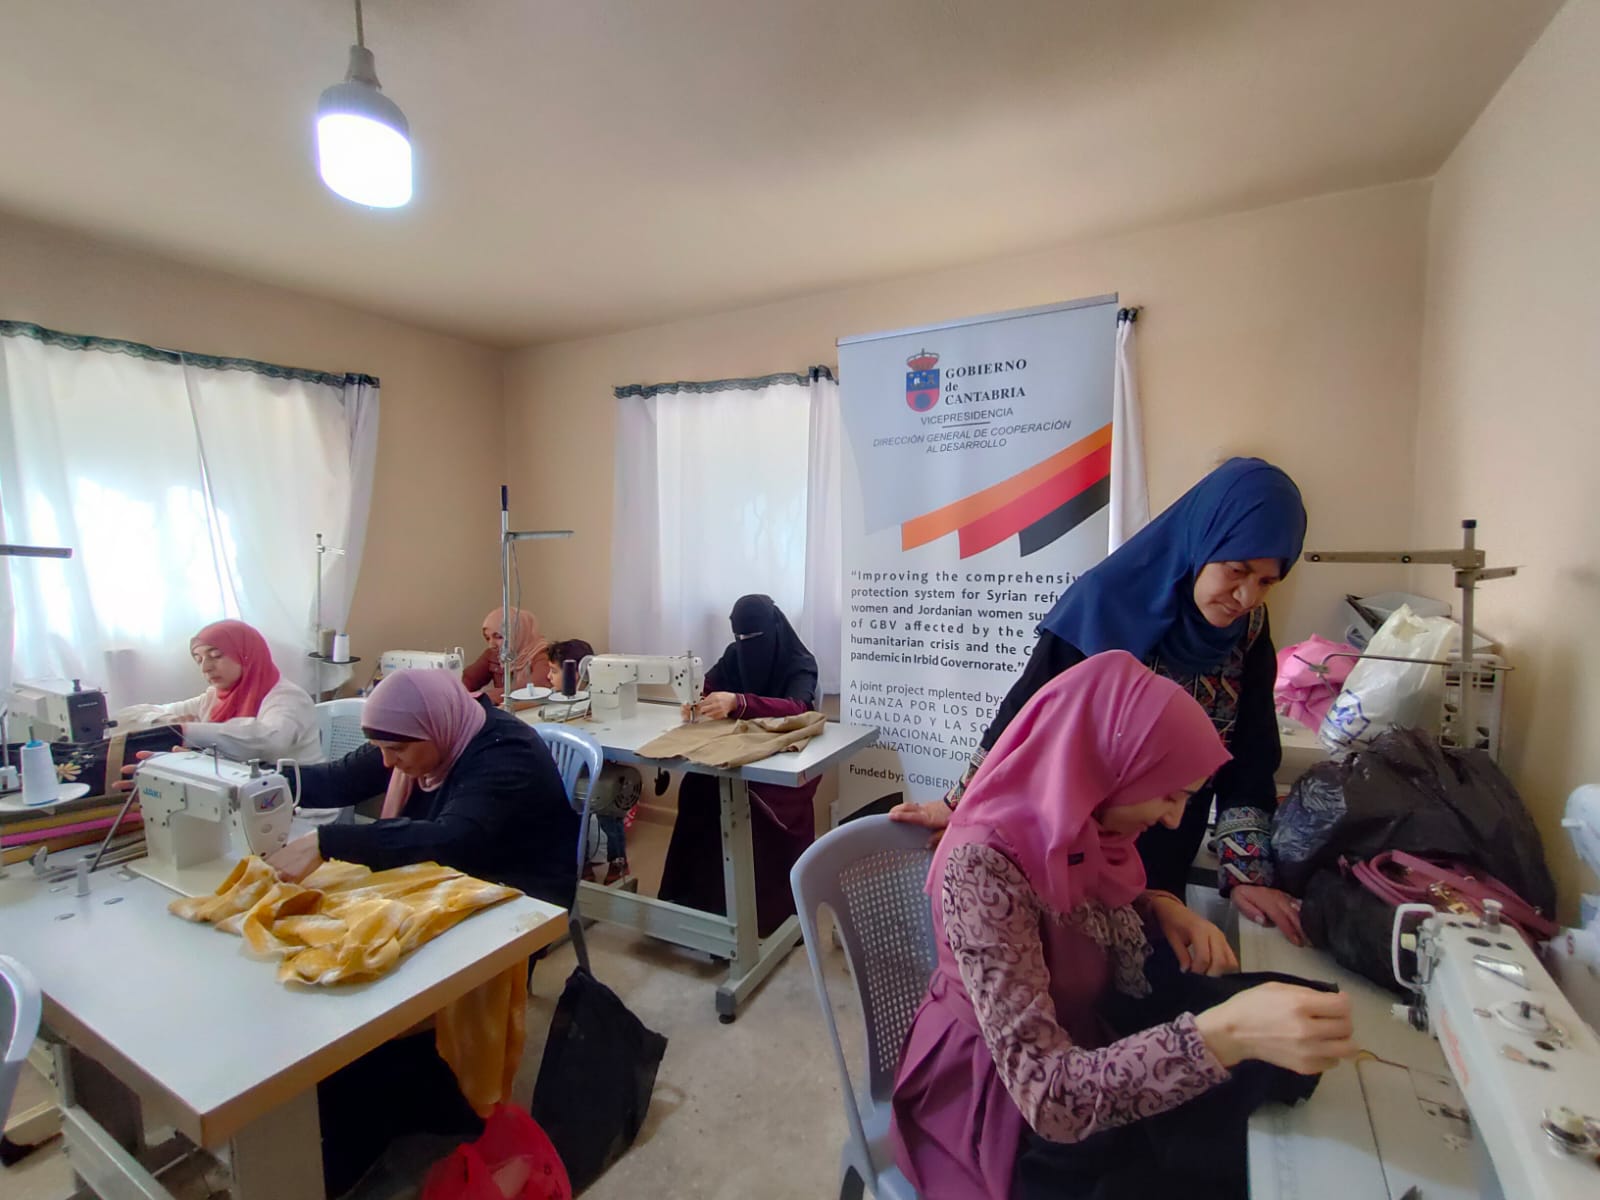 Improving the Comprehensive Protection System for Syrian and Jordanian Refugee Women Survivors of Gender-Based Violence and Those Affected by the Syrian Humanitarian Crisis and the COVID-19 Pandemic in Irbid Governorate